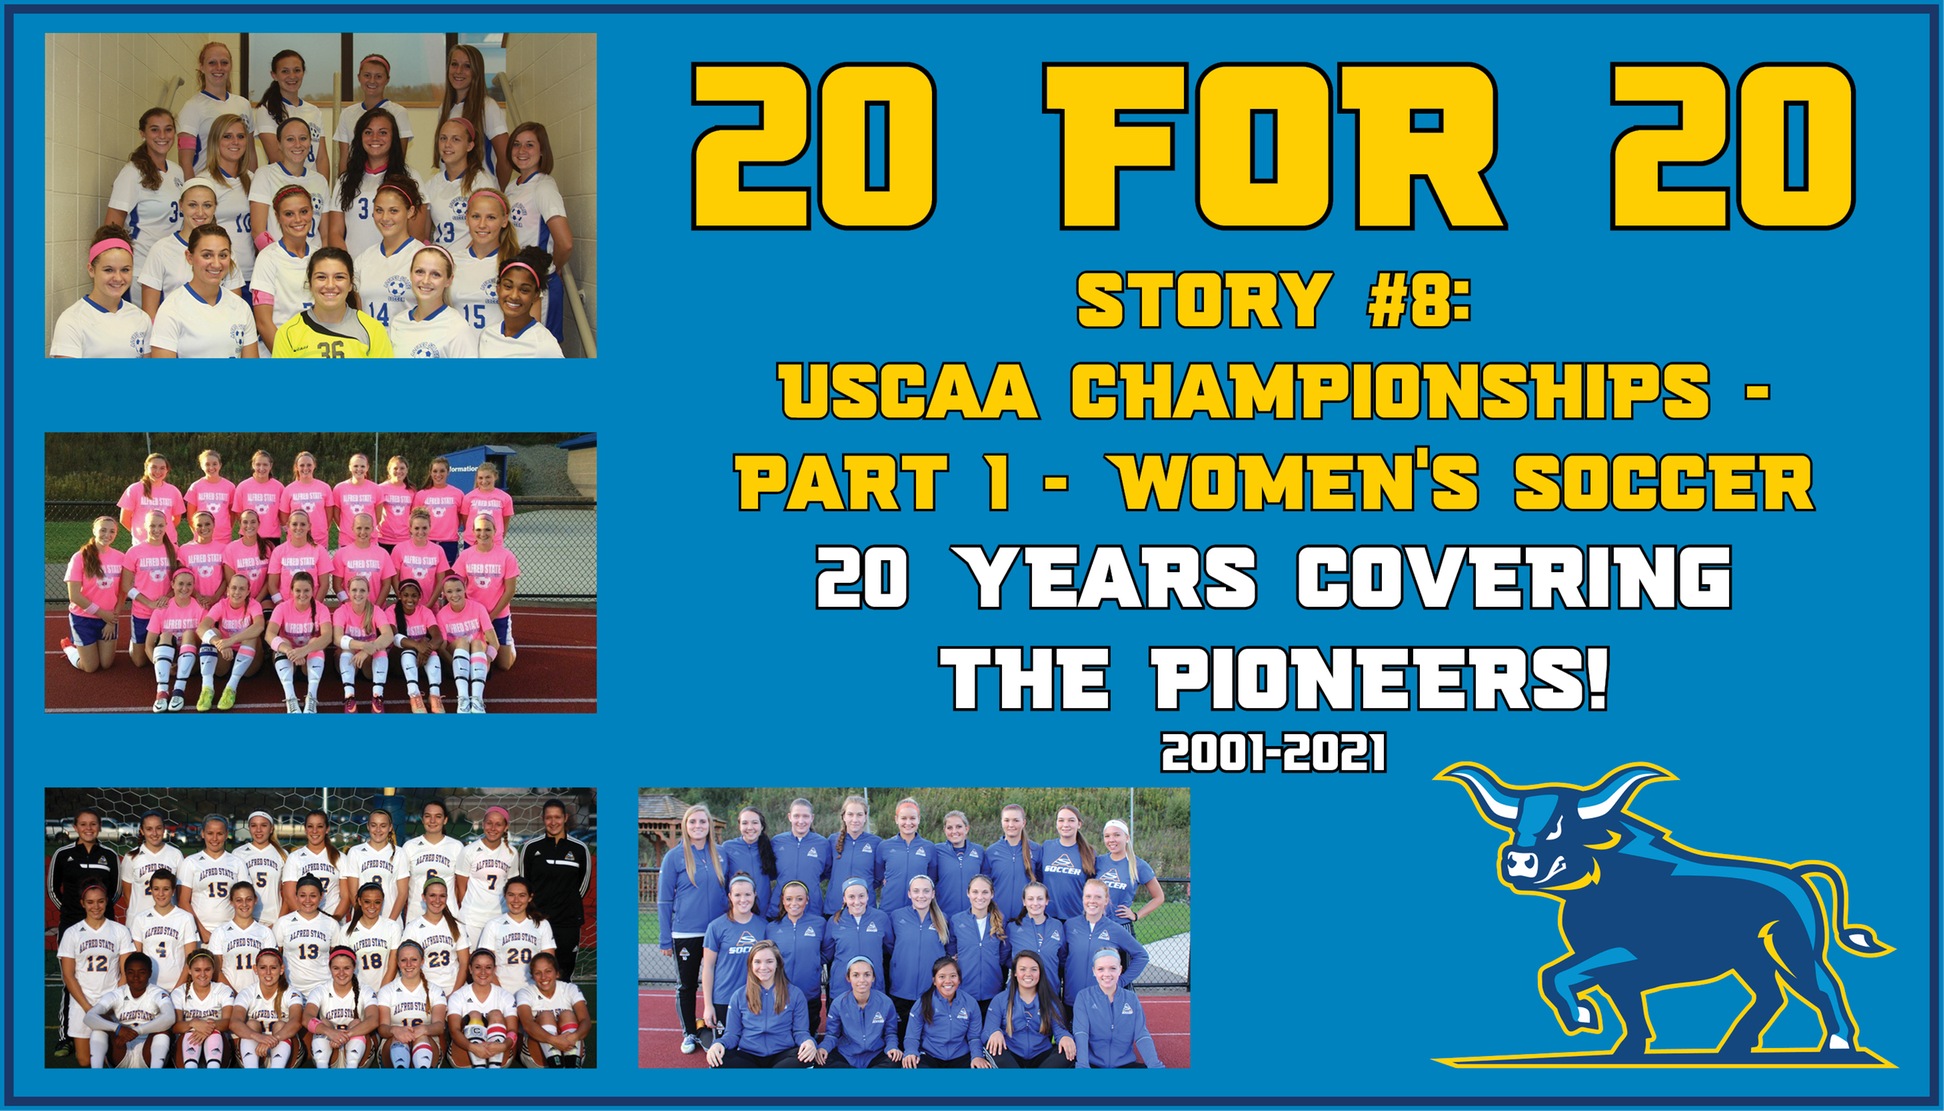 20 for 20 - Story #8 - USCAA Championships - Part 1 - Women's Soccer